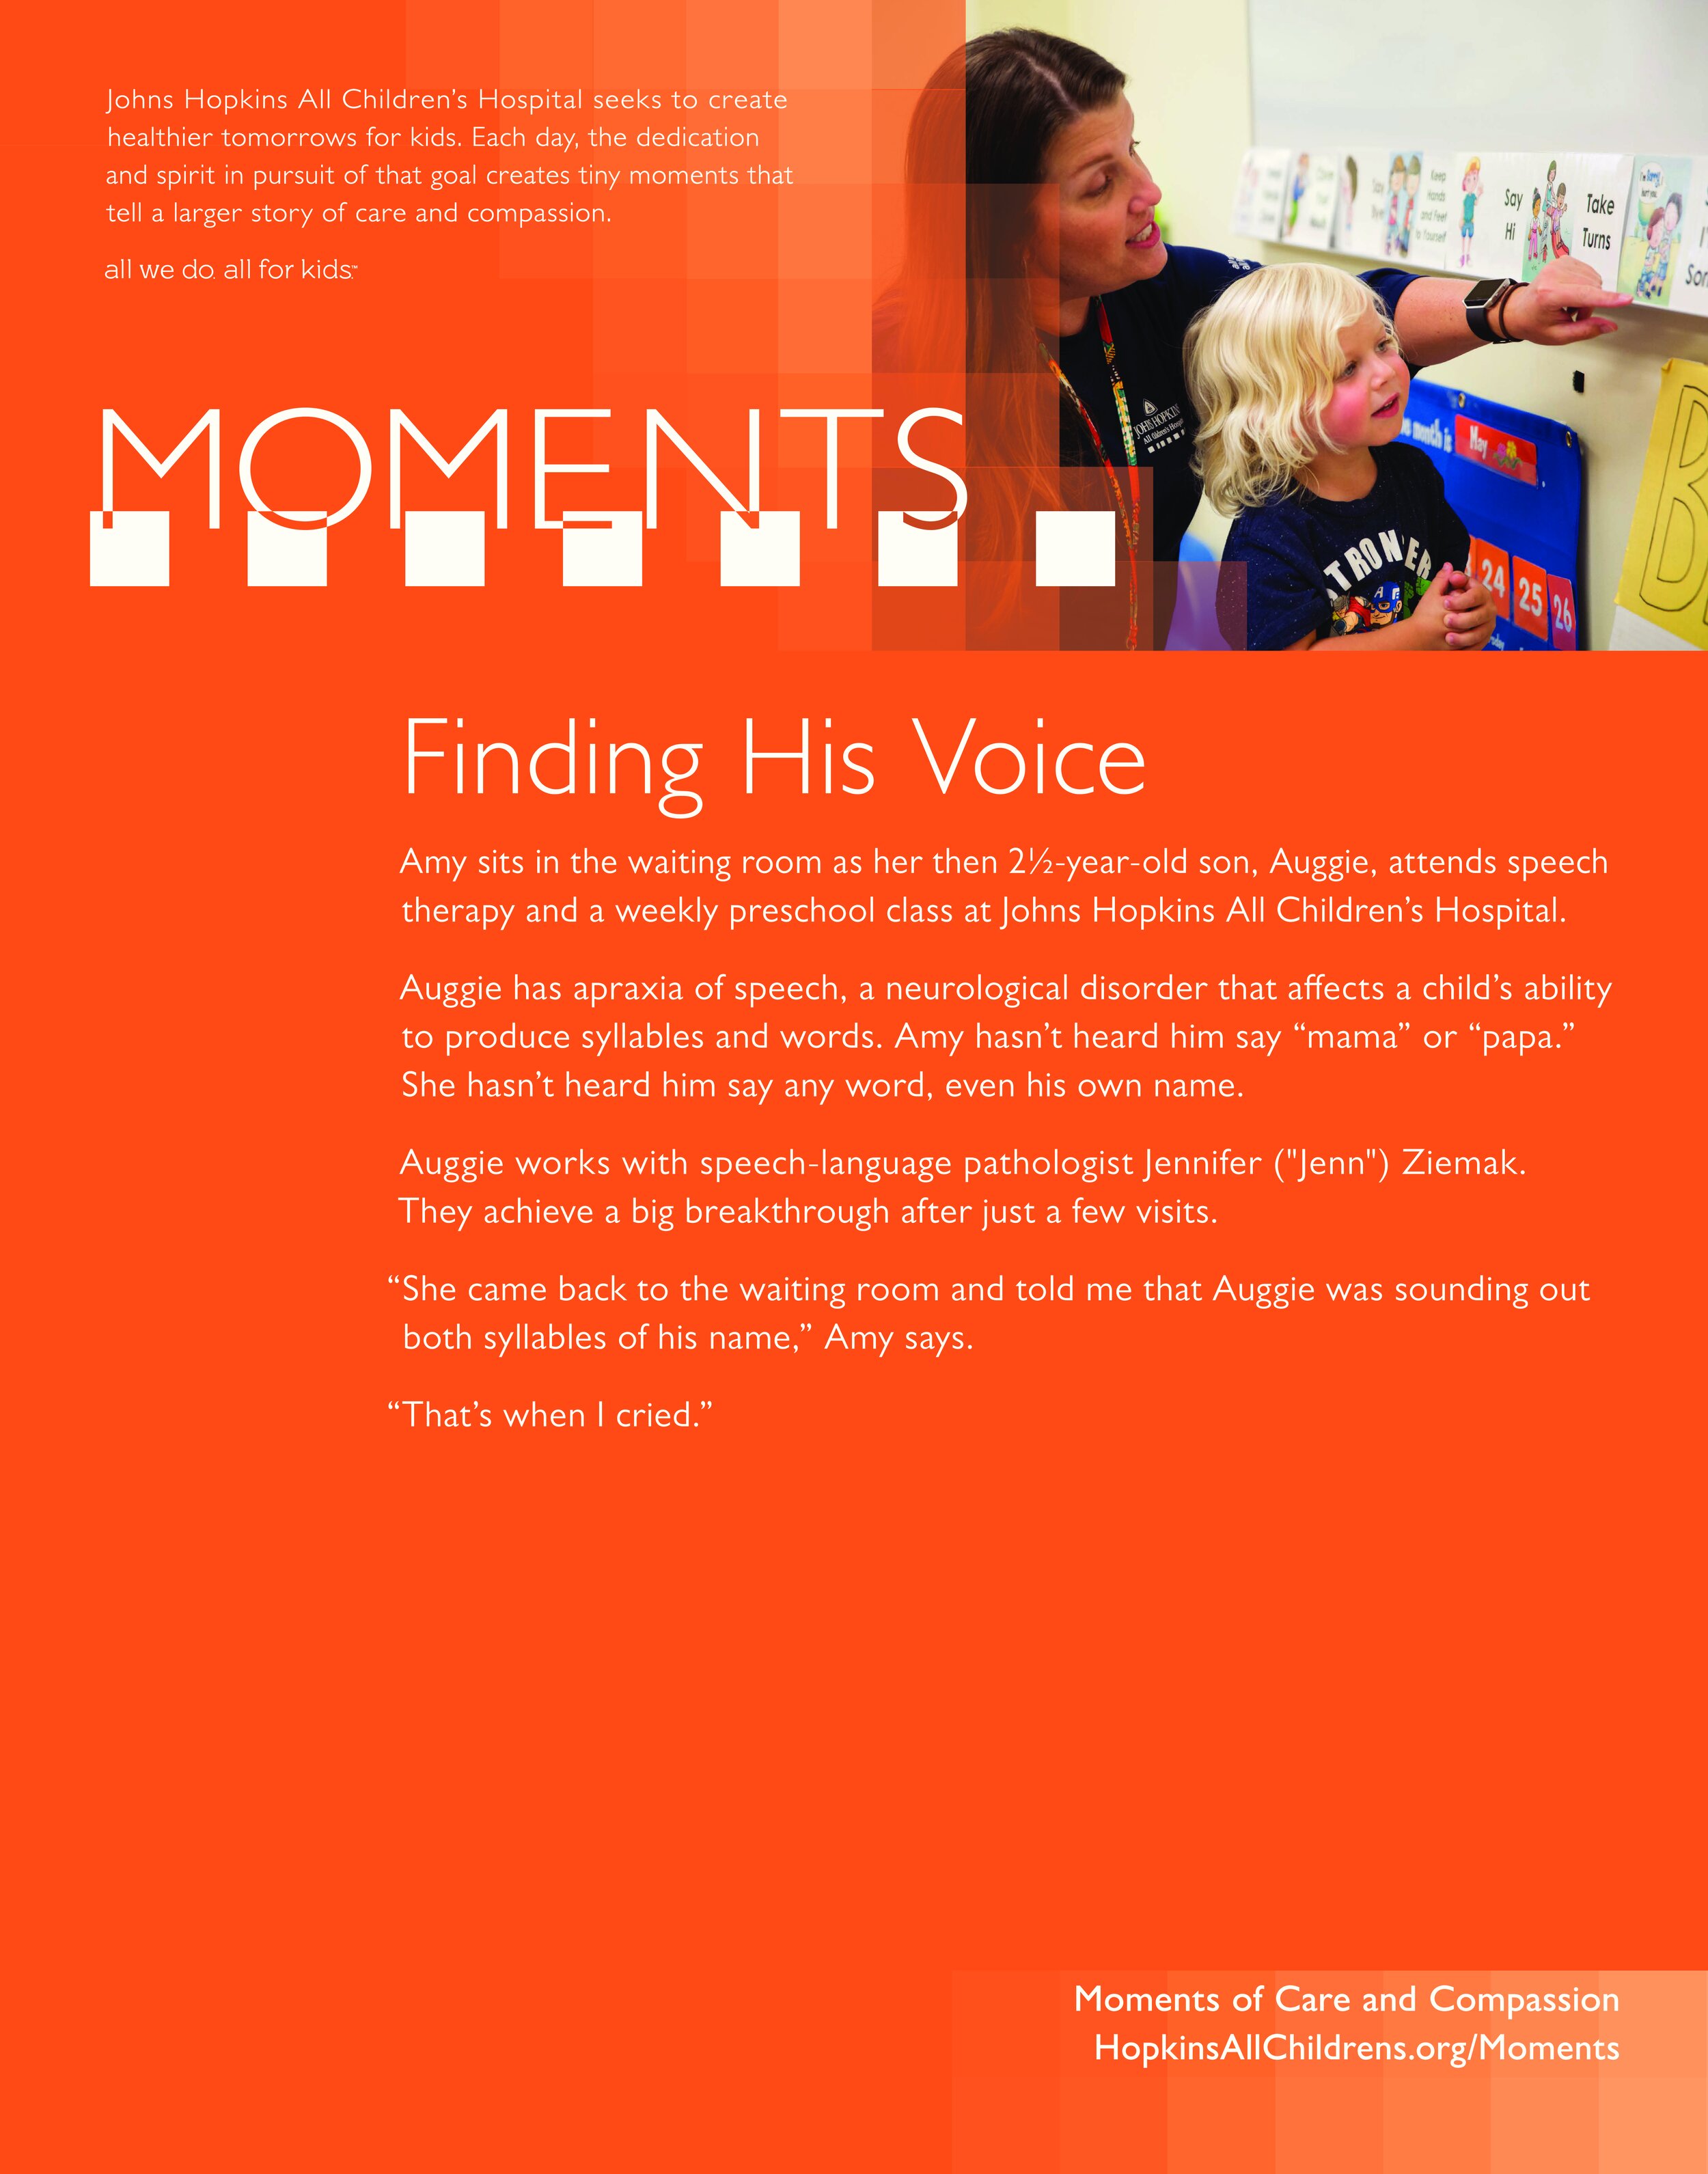 Moments Posters_Finding His Voice-page-0.jpg